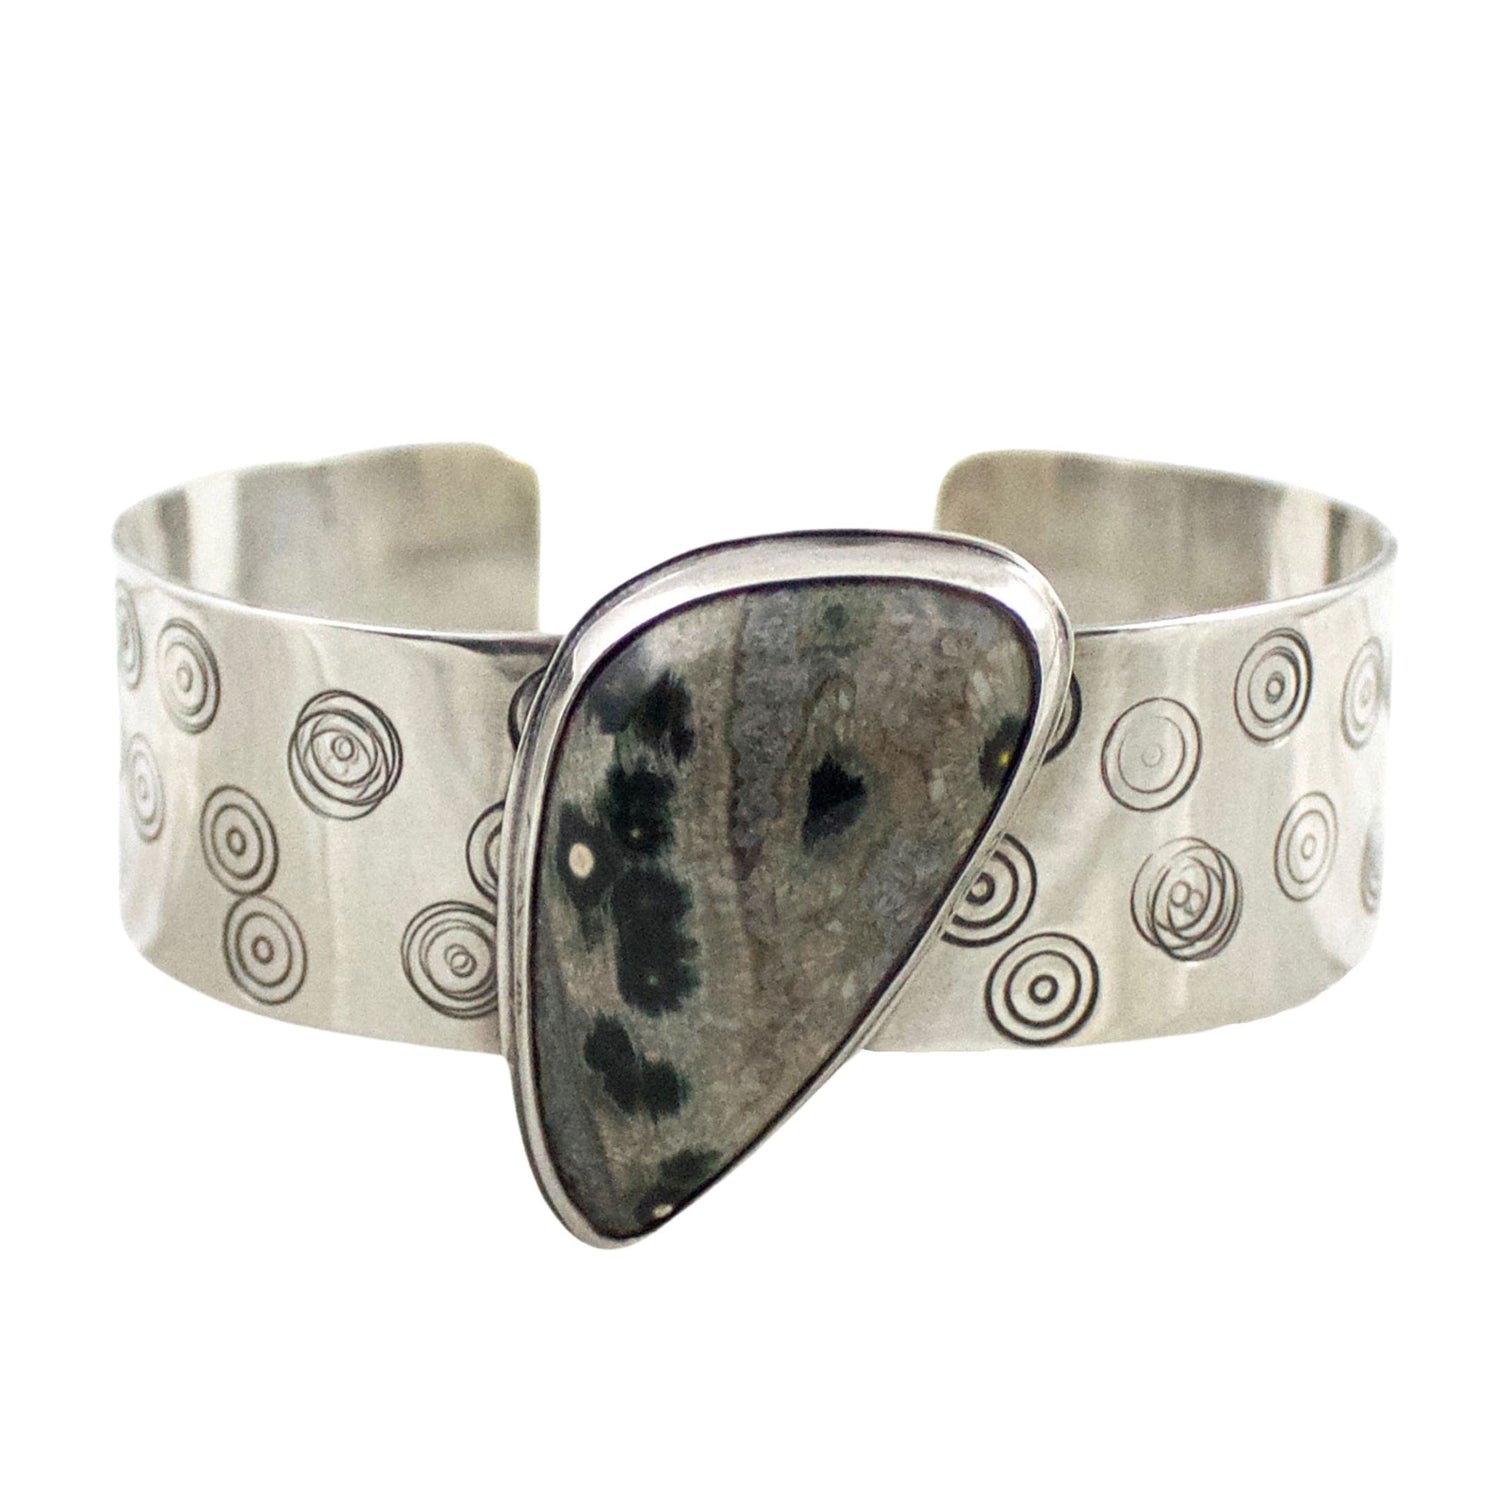 Sterling silver cuff bracelet with ocean jasper and orbs design. The cuff has an offset triangle shaped ocena jasper stone. The stone is muted browns and grays with round green circles throughout the stone. The circles are a feature of ocean jasper. The wide cuff bracele is stamped with nested circle patterns.